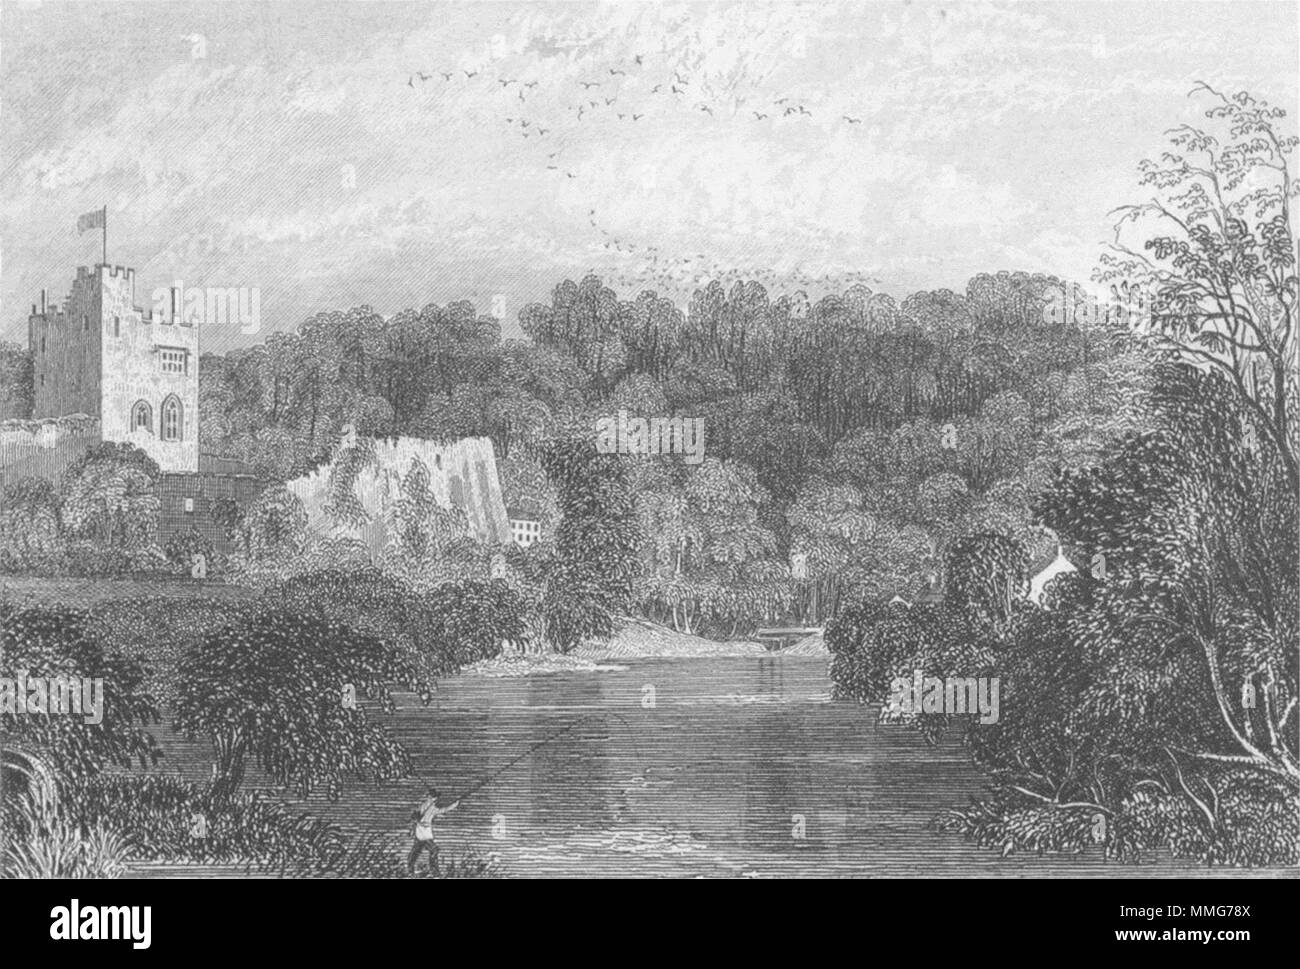 WALES. Bala lake, Merionethshire. DUGDALE c1840 old antique print picture Stock Photo